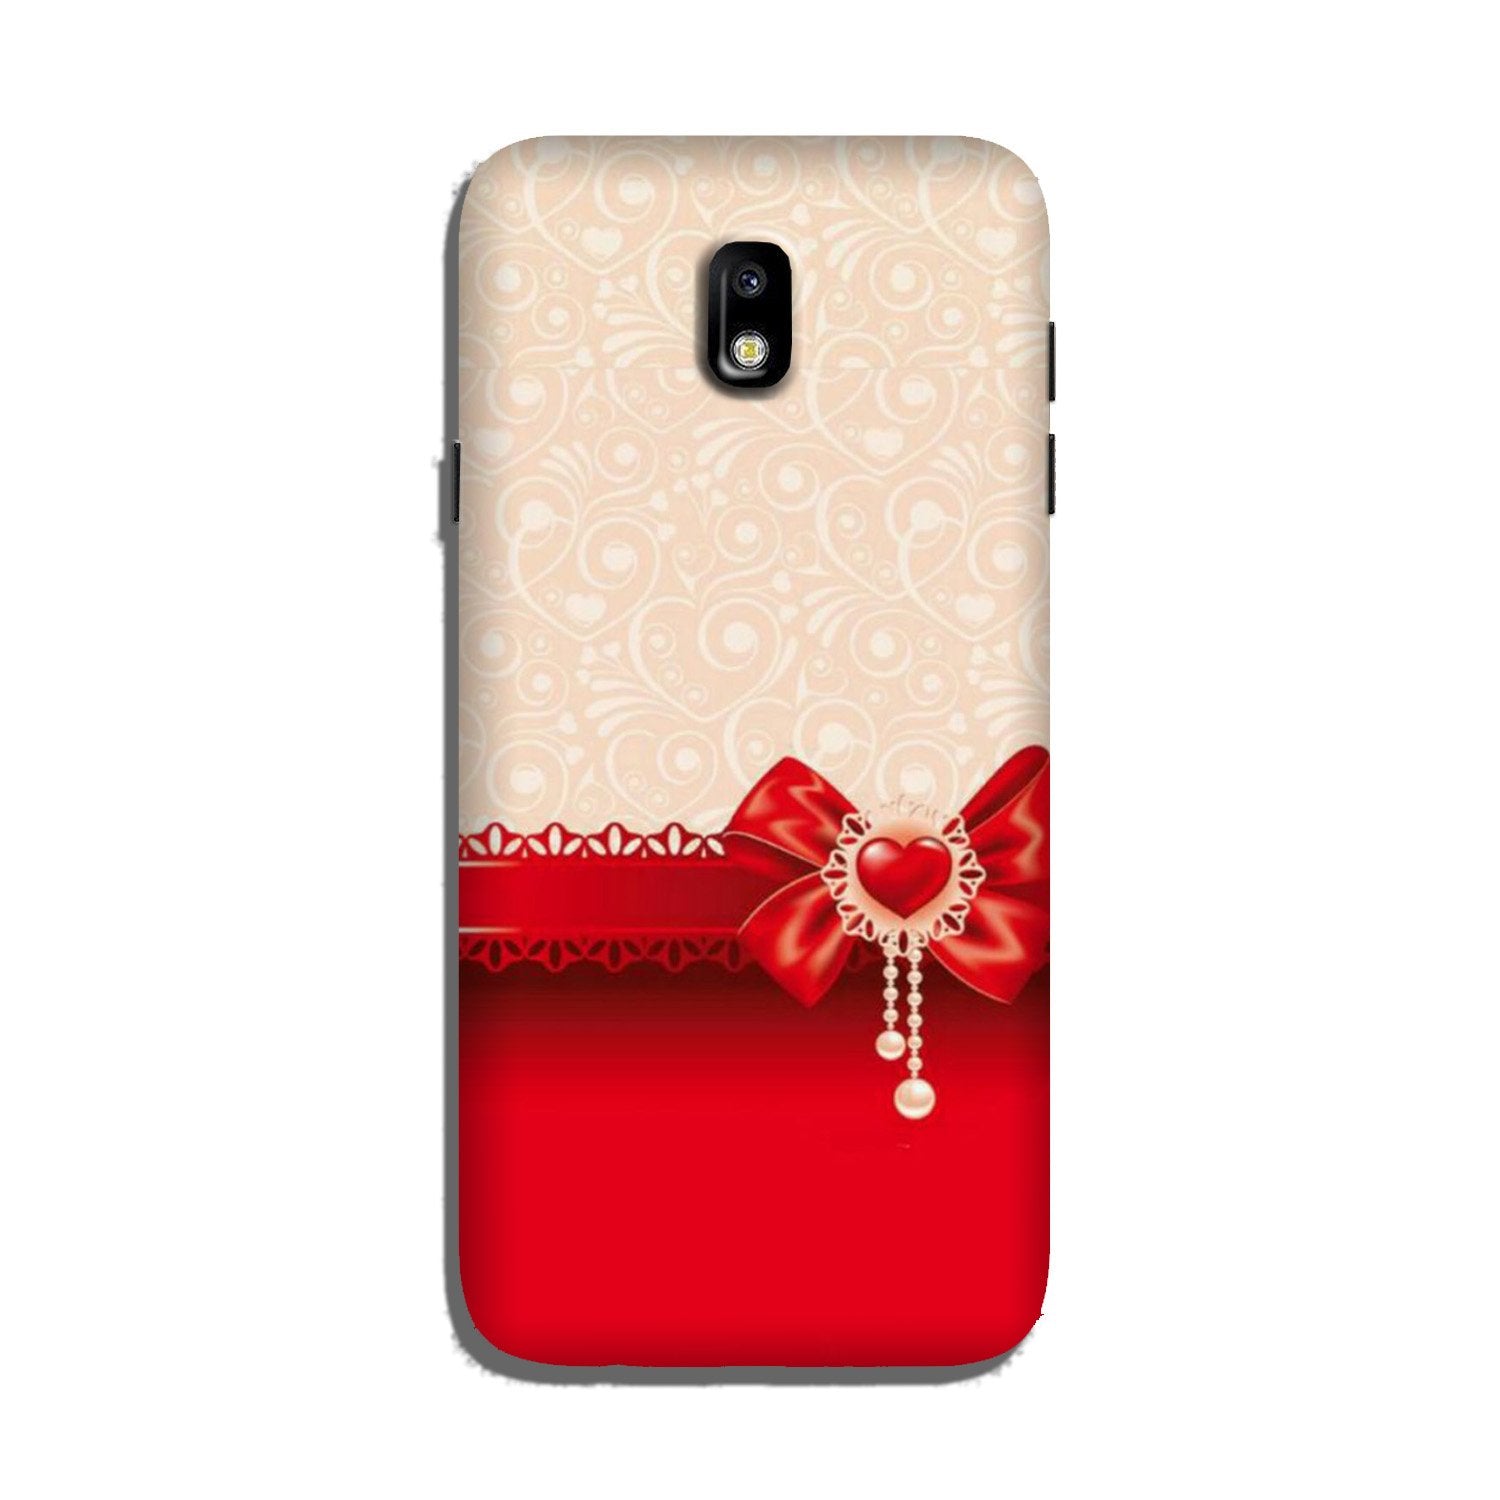 Gift Wrap3 Case for Galaxy J7 Pro